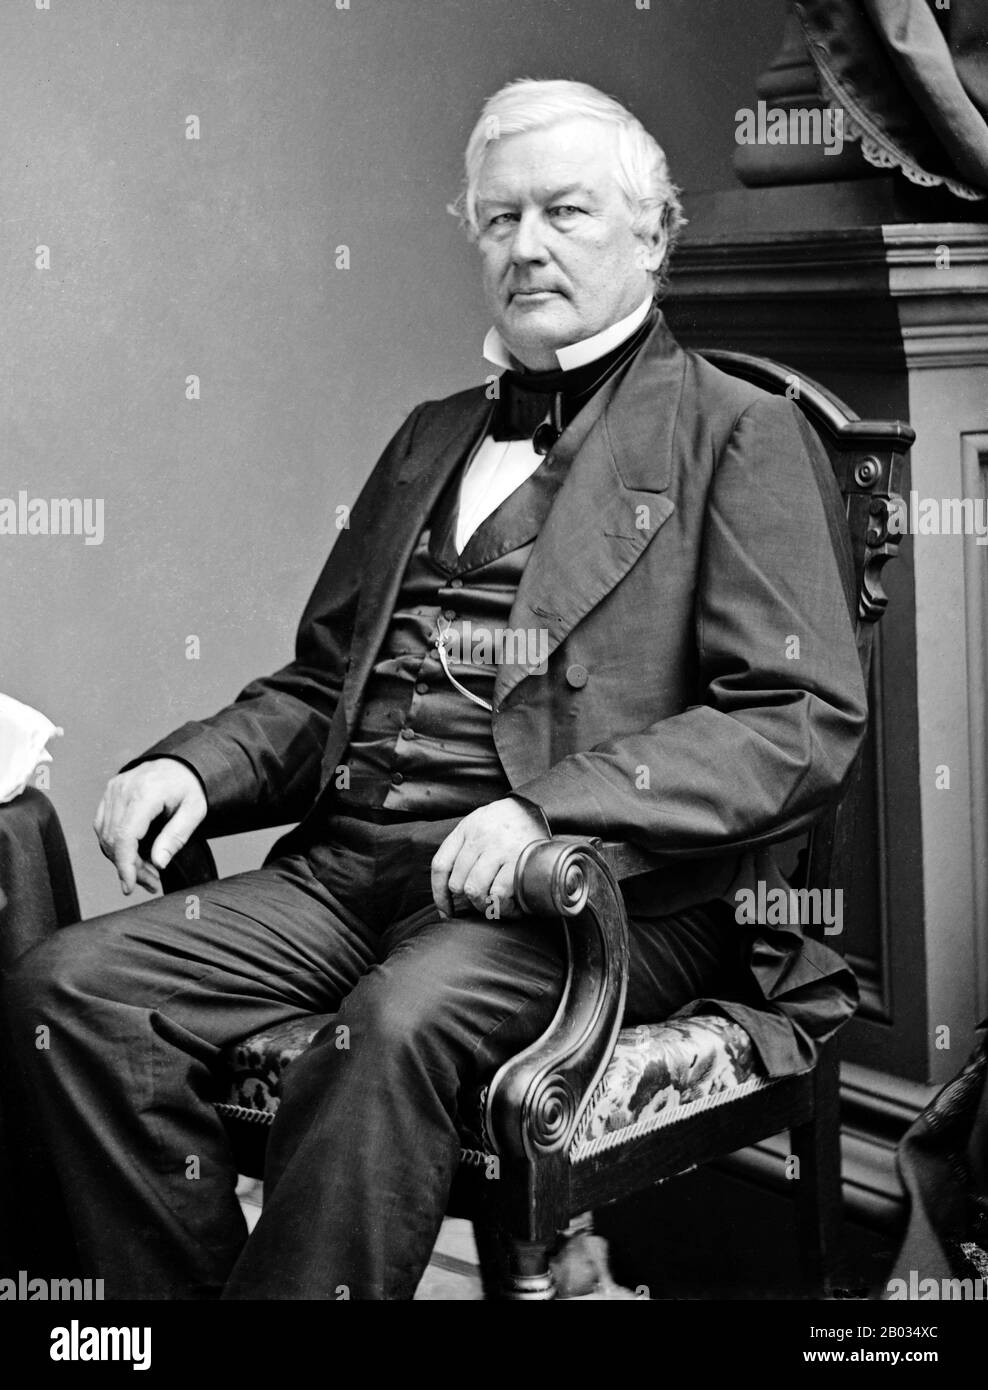 Millard Fillmore (January 7, 1800 – March 8, 1874) was an American statesman who served as the 13th President of the United States from 1850 to 1853.  He was the last Whig president, and the last president not to be affiliated with either the Democratic or Republican parties. Stock Photo